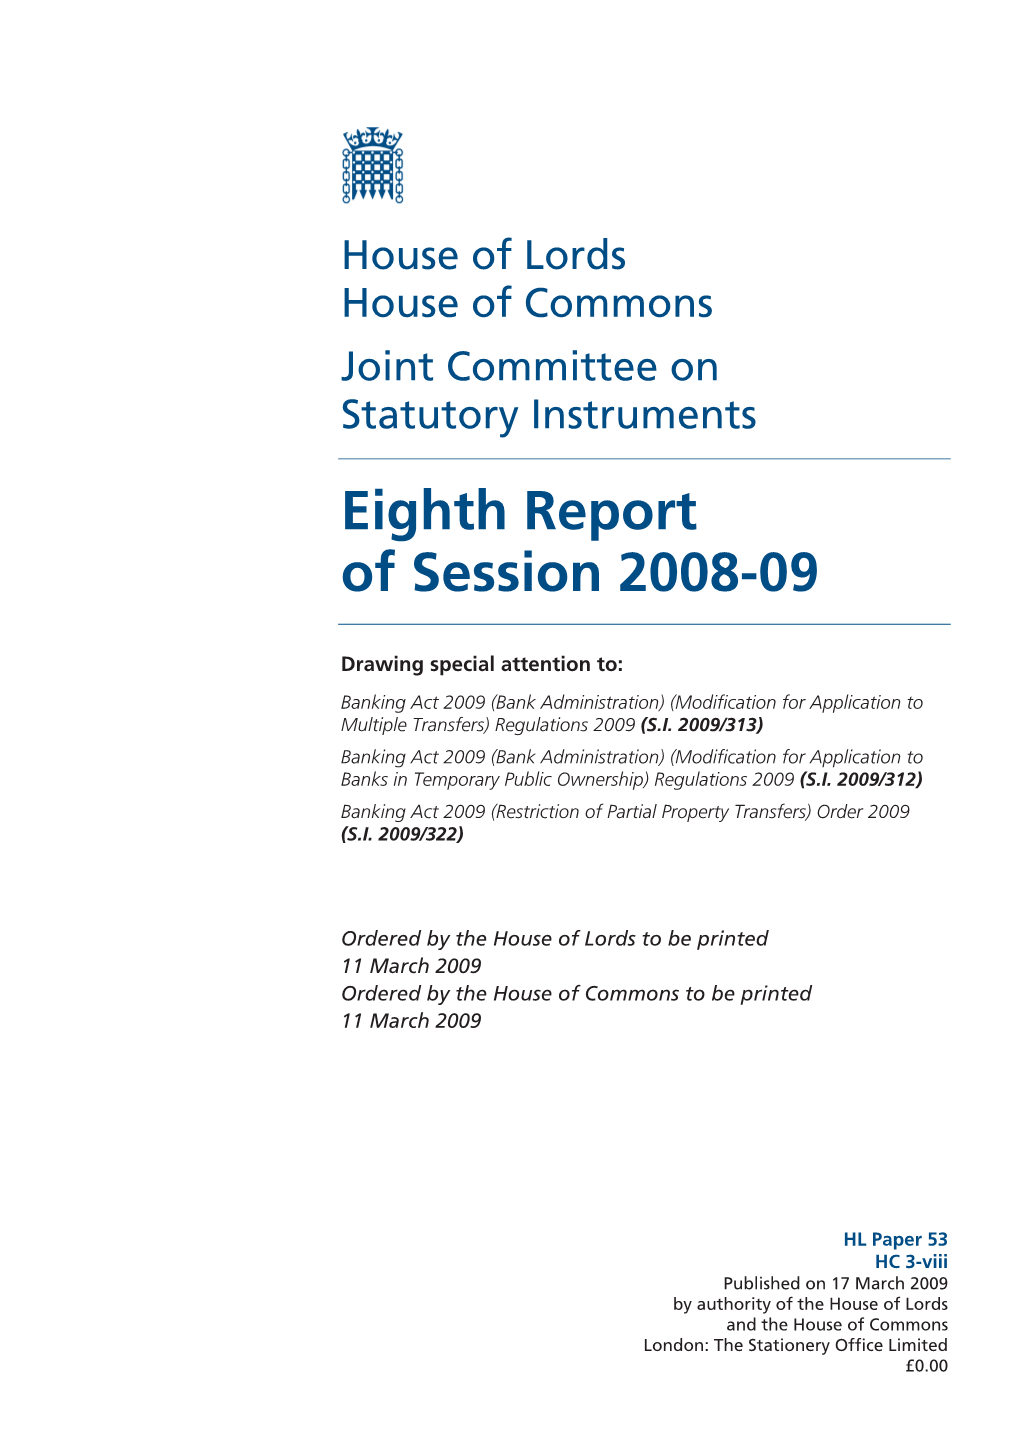 Eighth Report of Session 2008-09